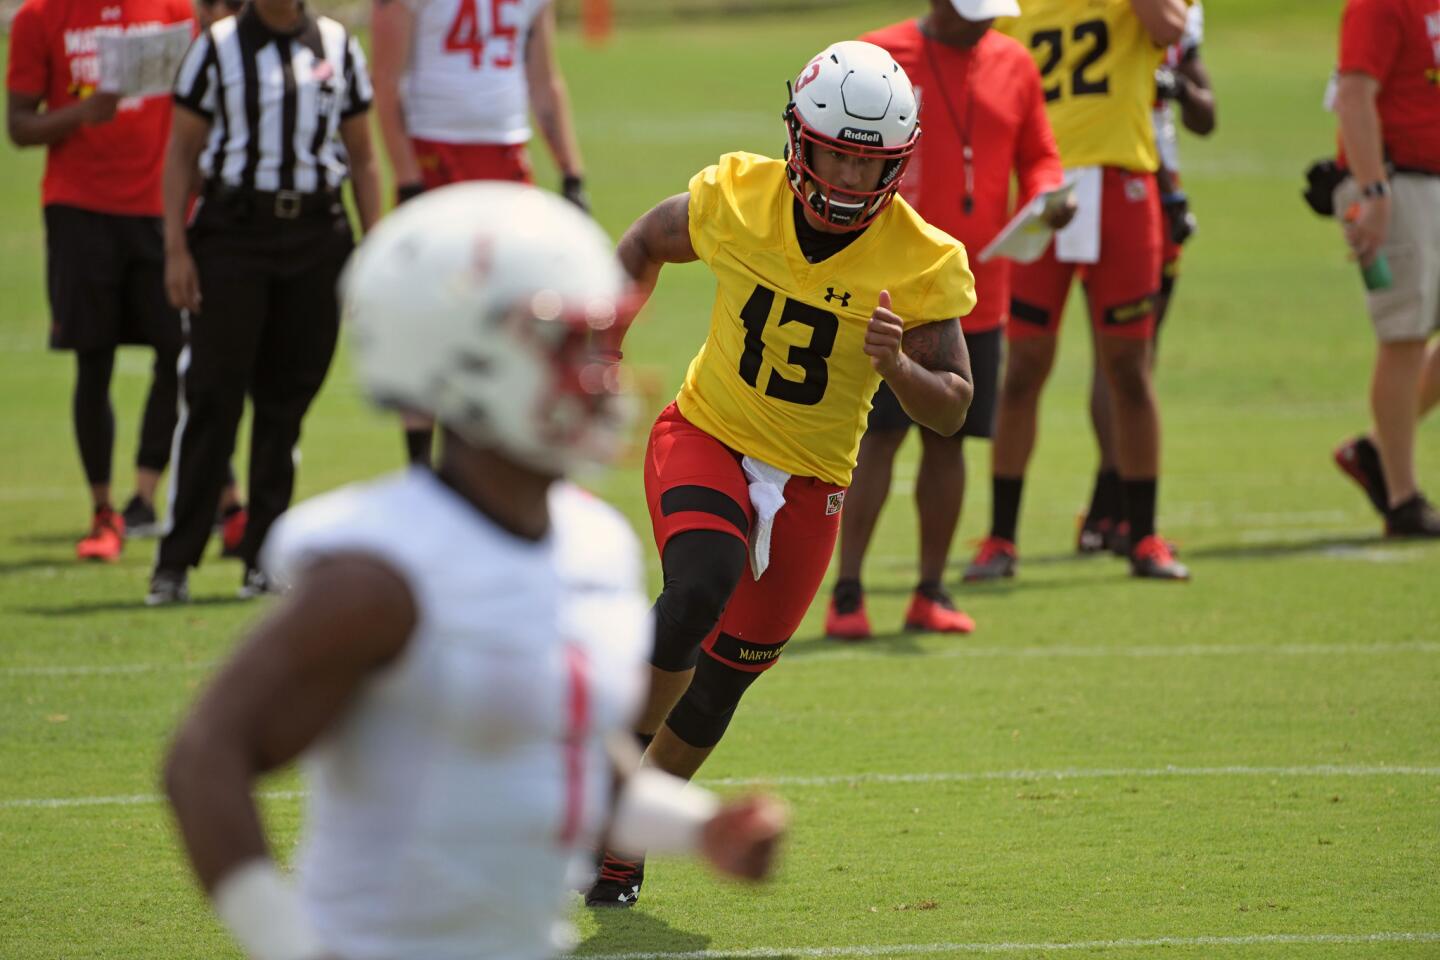 Tyler DeSue, University of Maryland QB, runs after handing off the ball during a drill at Terps training camp on media day.